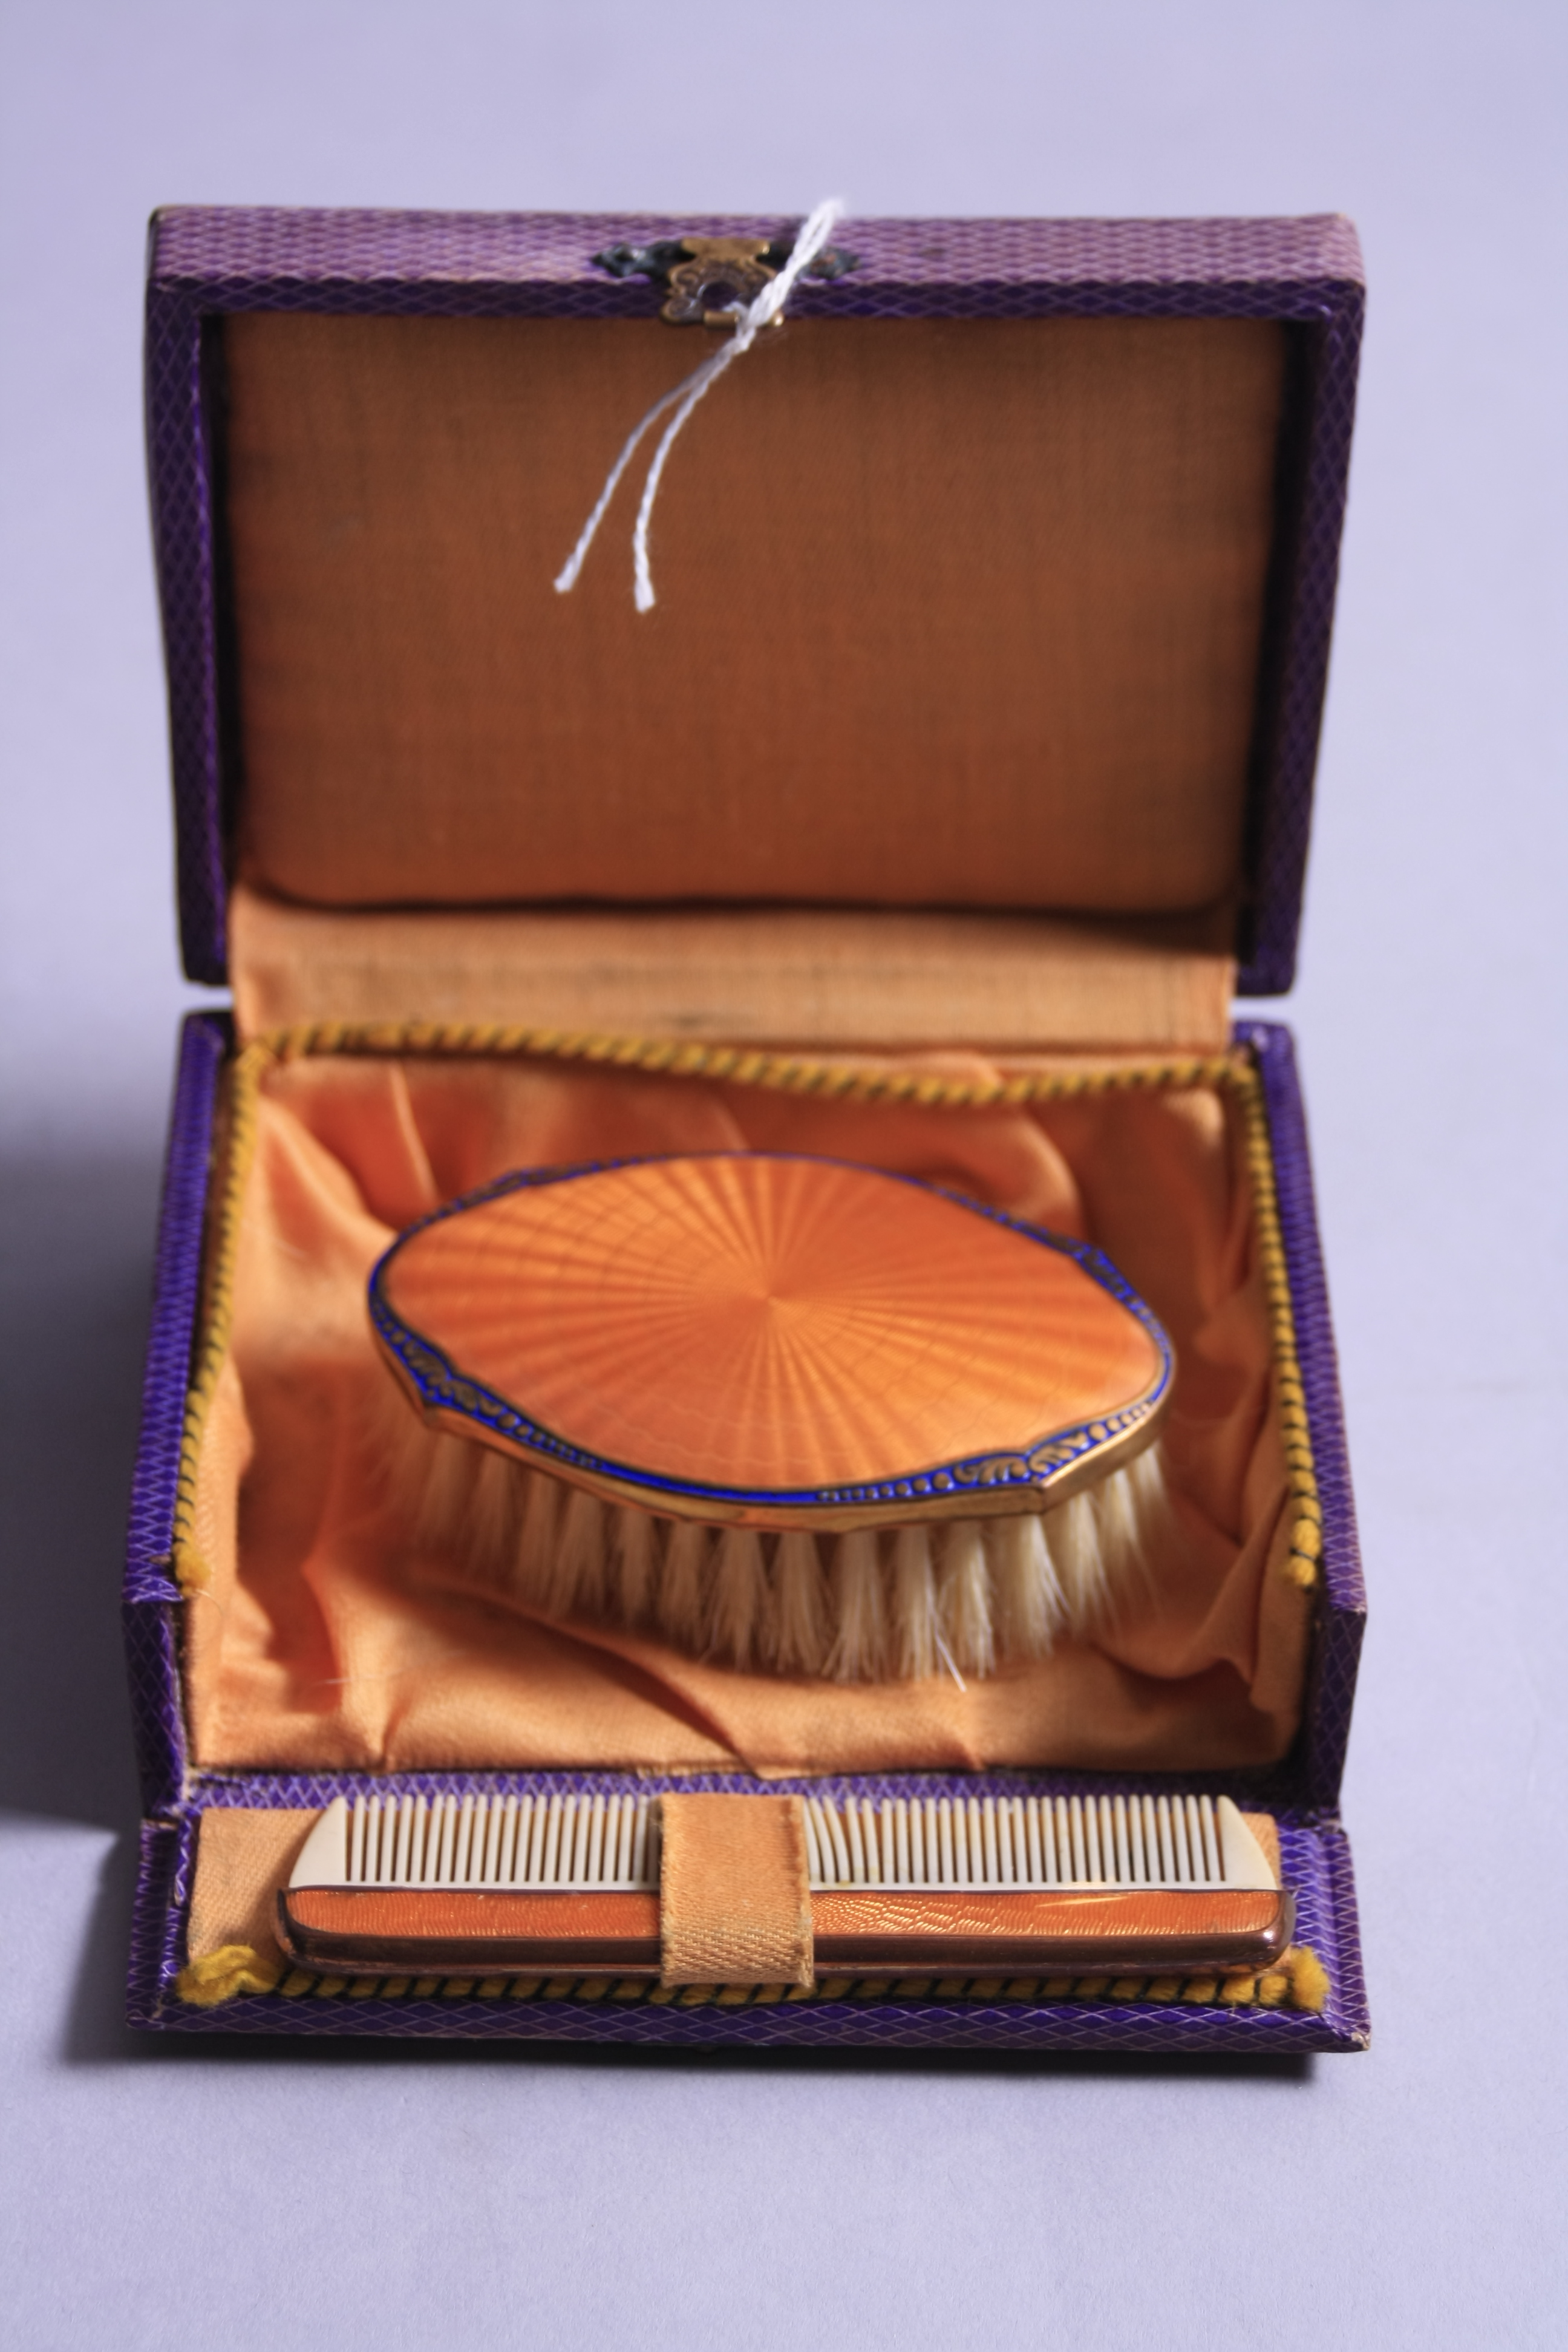 AN ENAMEL CHILD'S BRUSH AND COMB, in original box